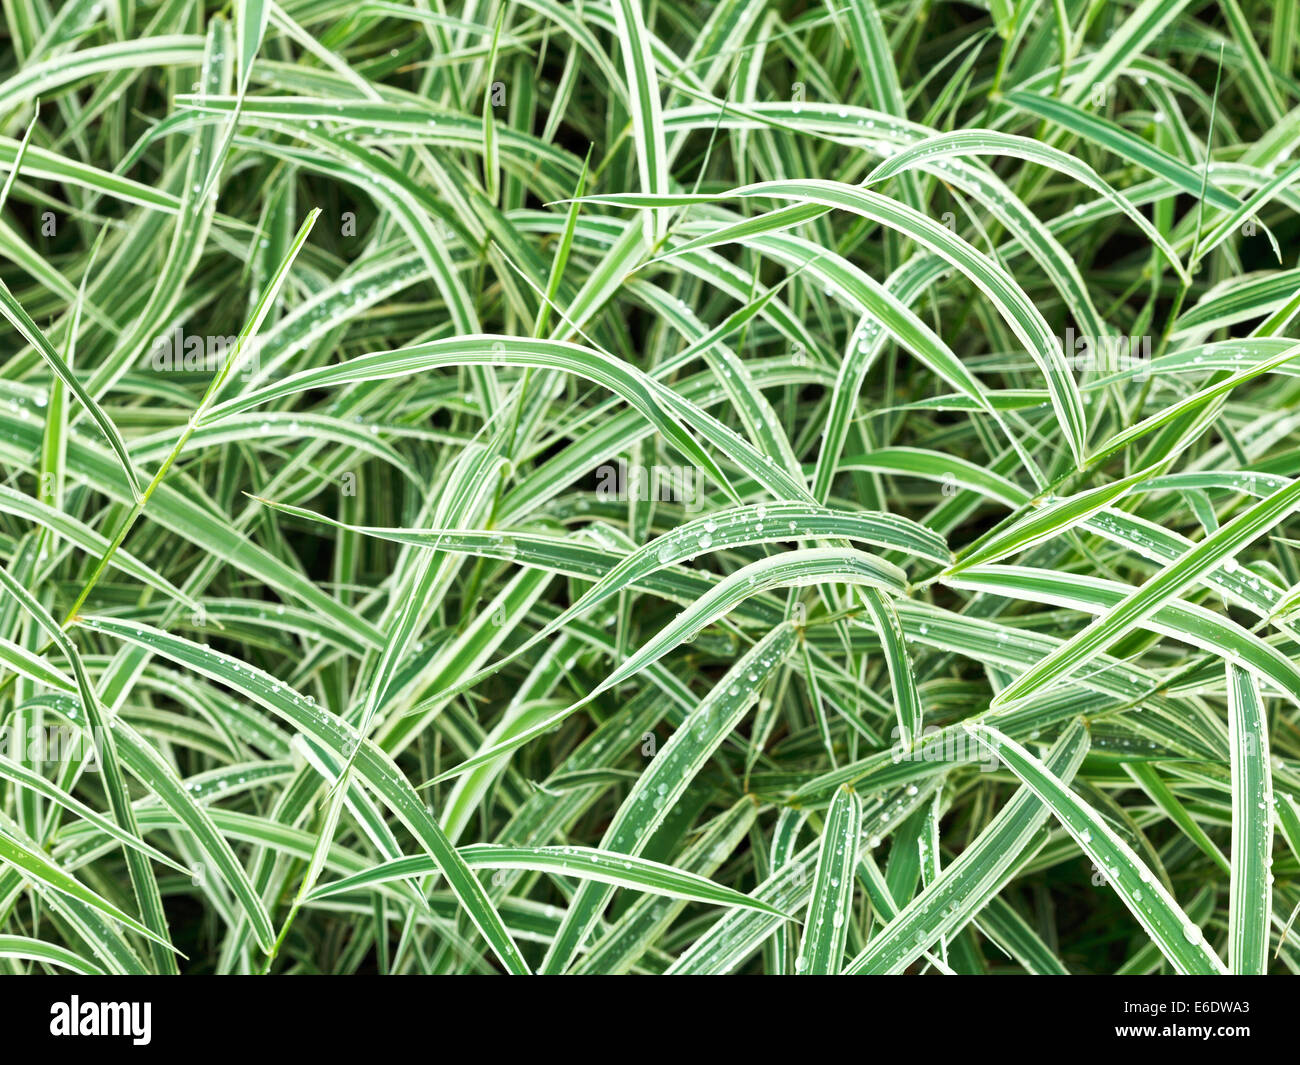 natural background from wet green leaves of carex morrowii variegata decorative grass after rain Stock Photo